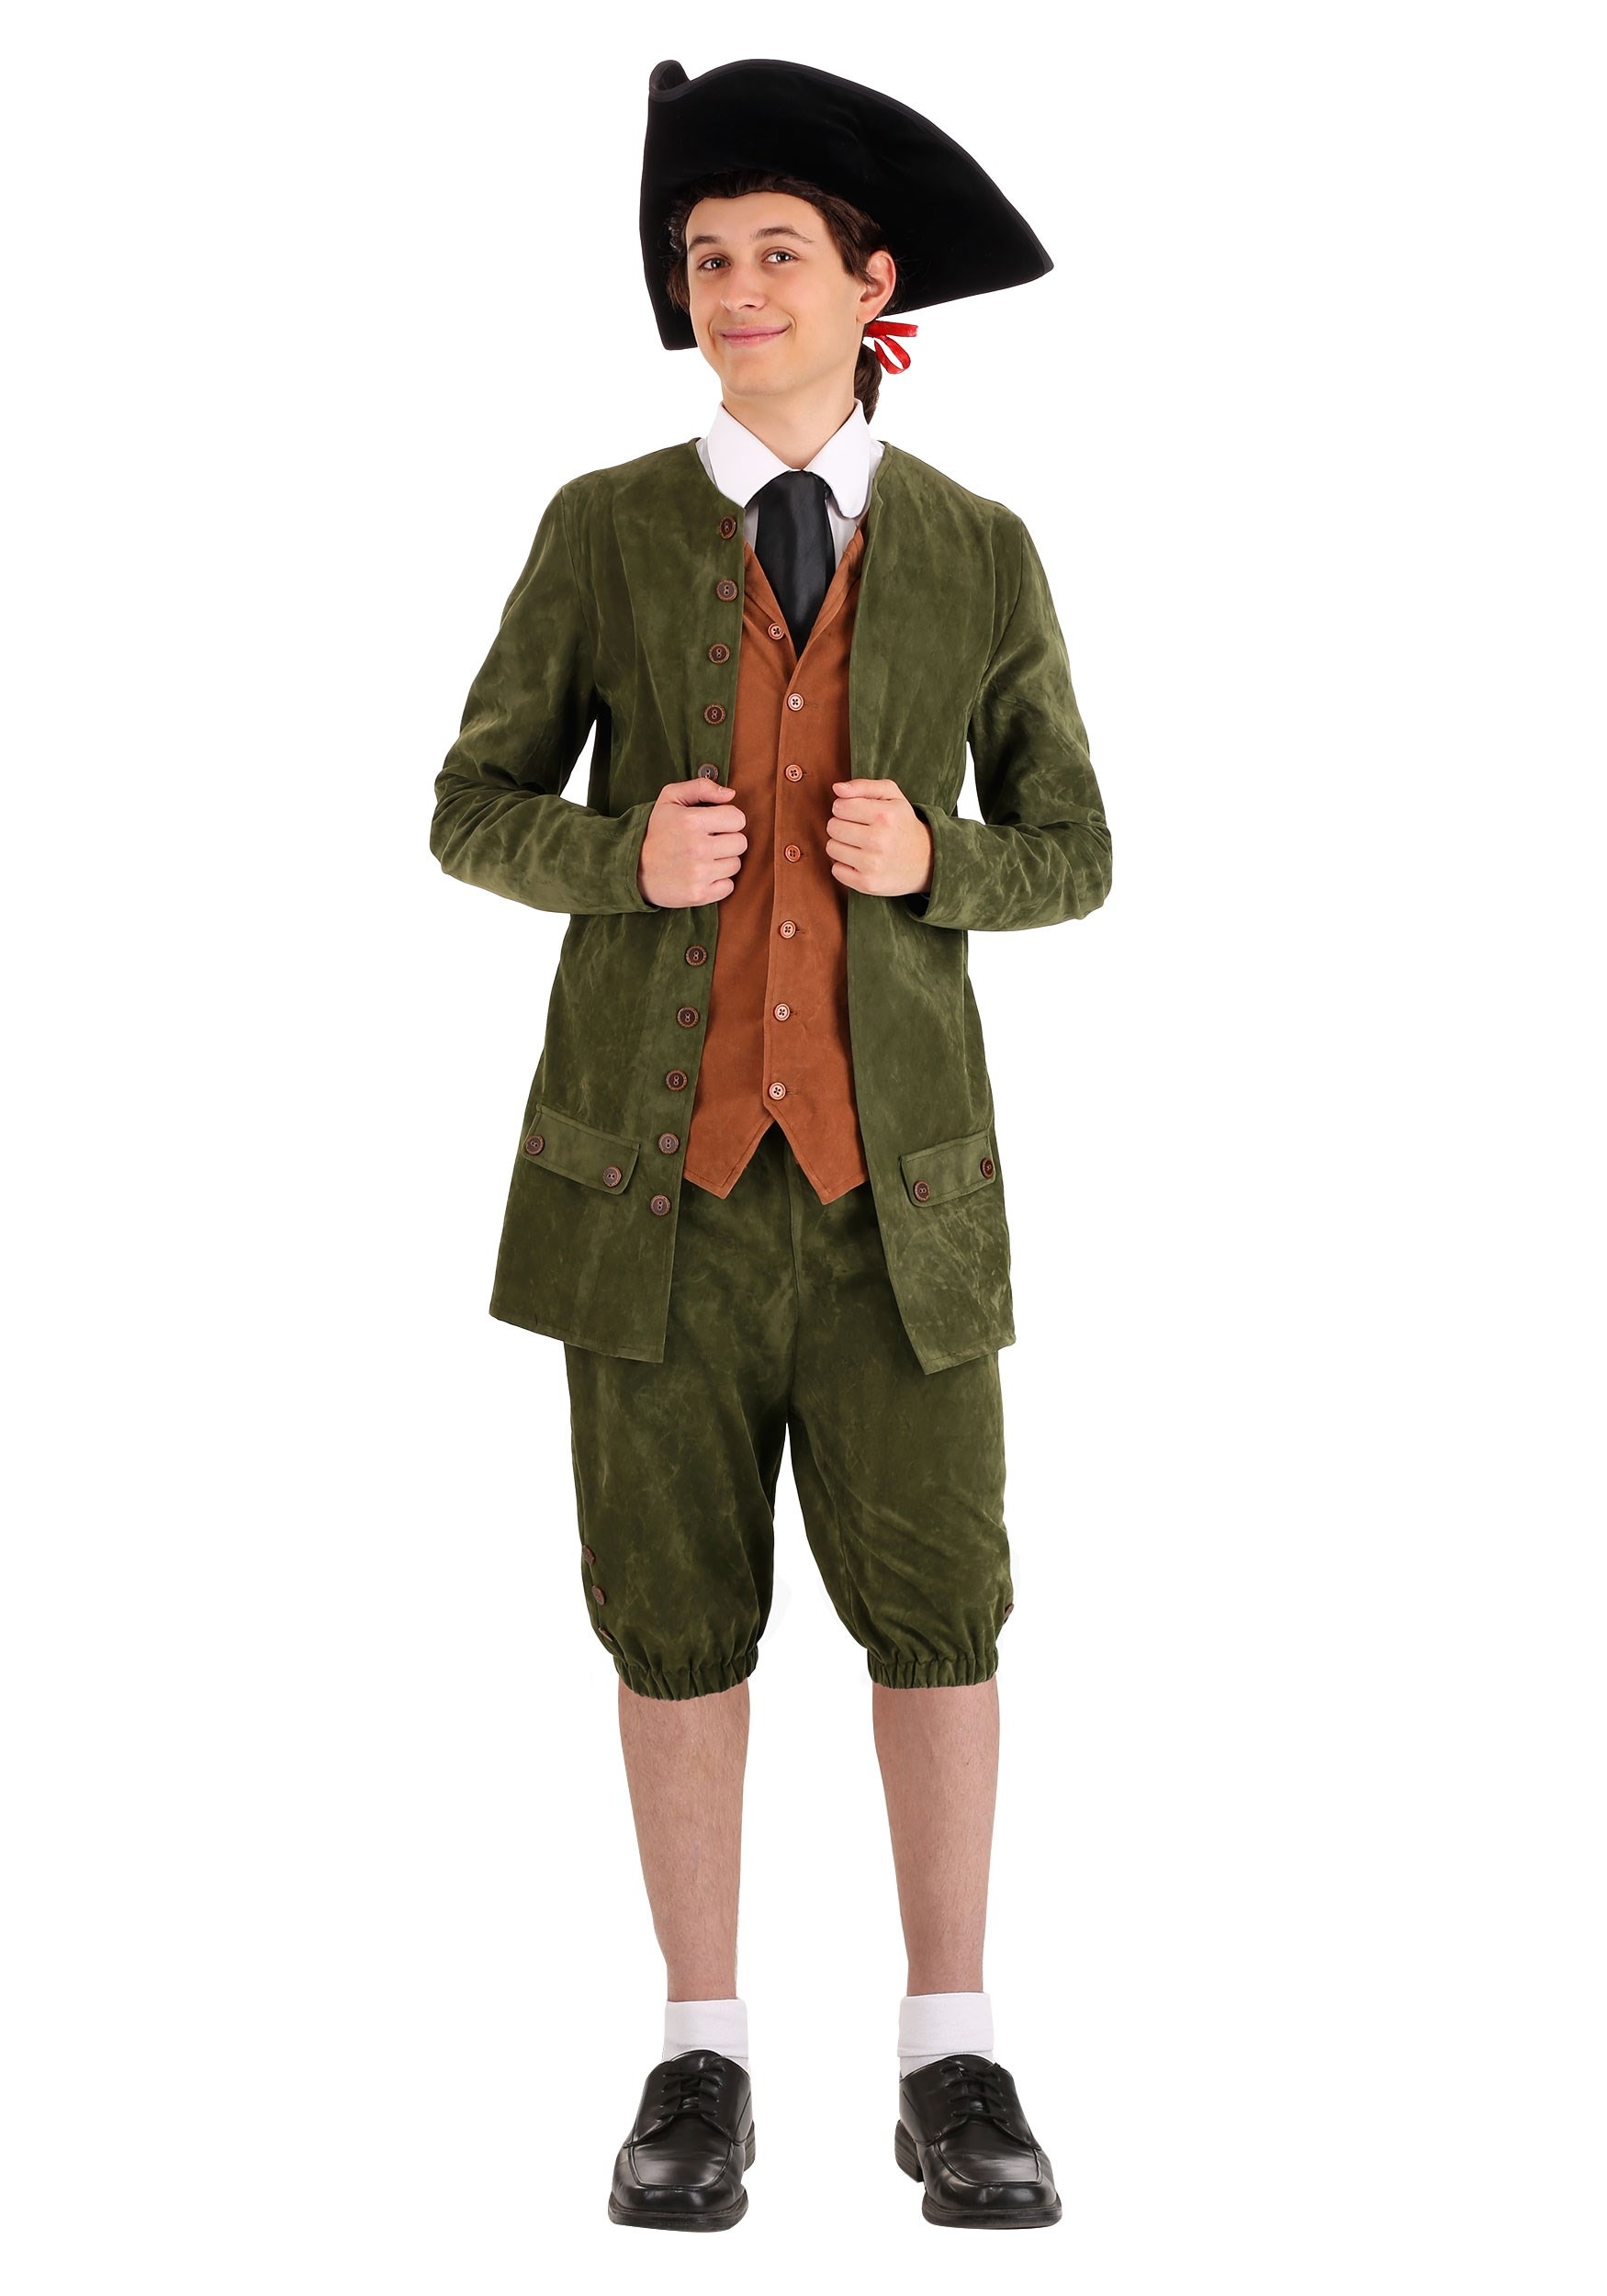 Photos - Fancy Dress FUN Costumes Green Colonial Costume for Men | Historical Costumes Black